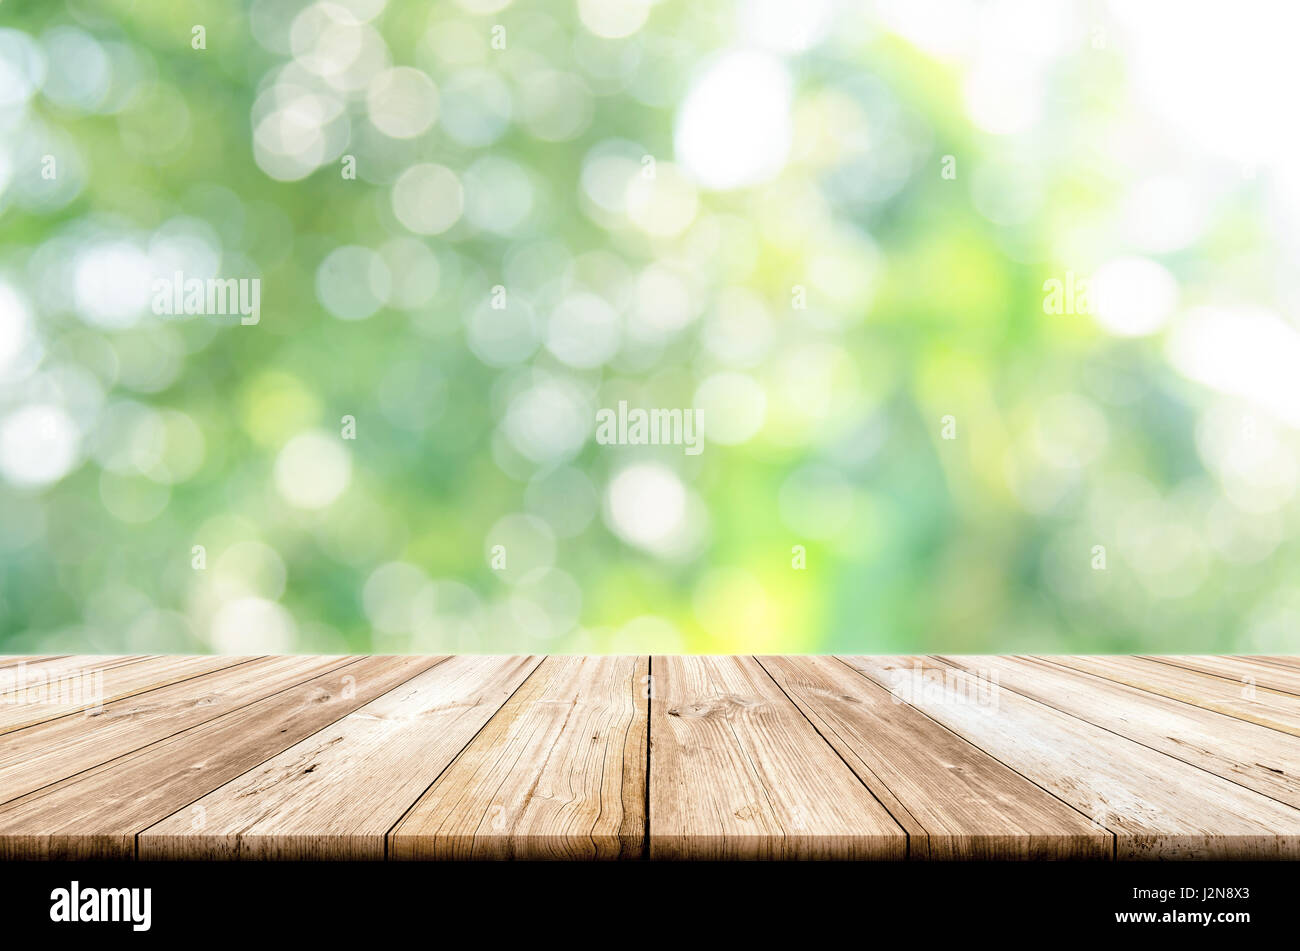 Empty wooden table top with blurred green garden background. can be used product display. Stock Photo